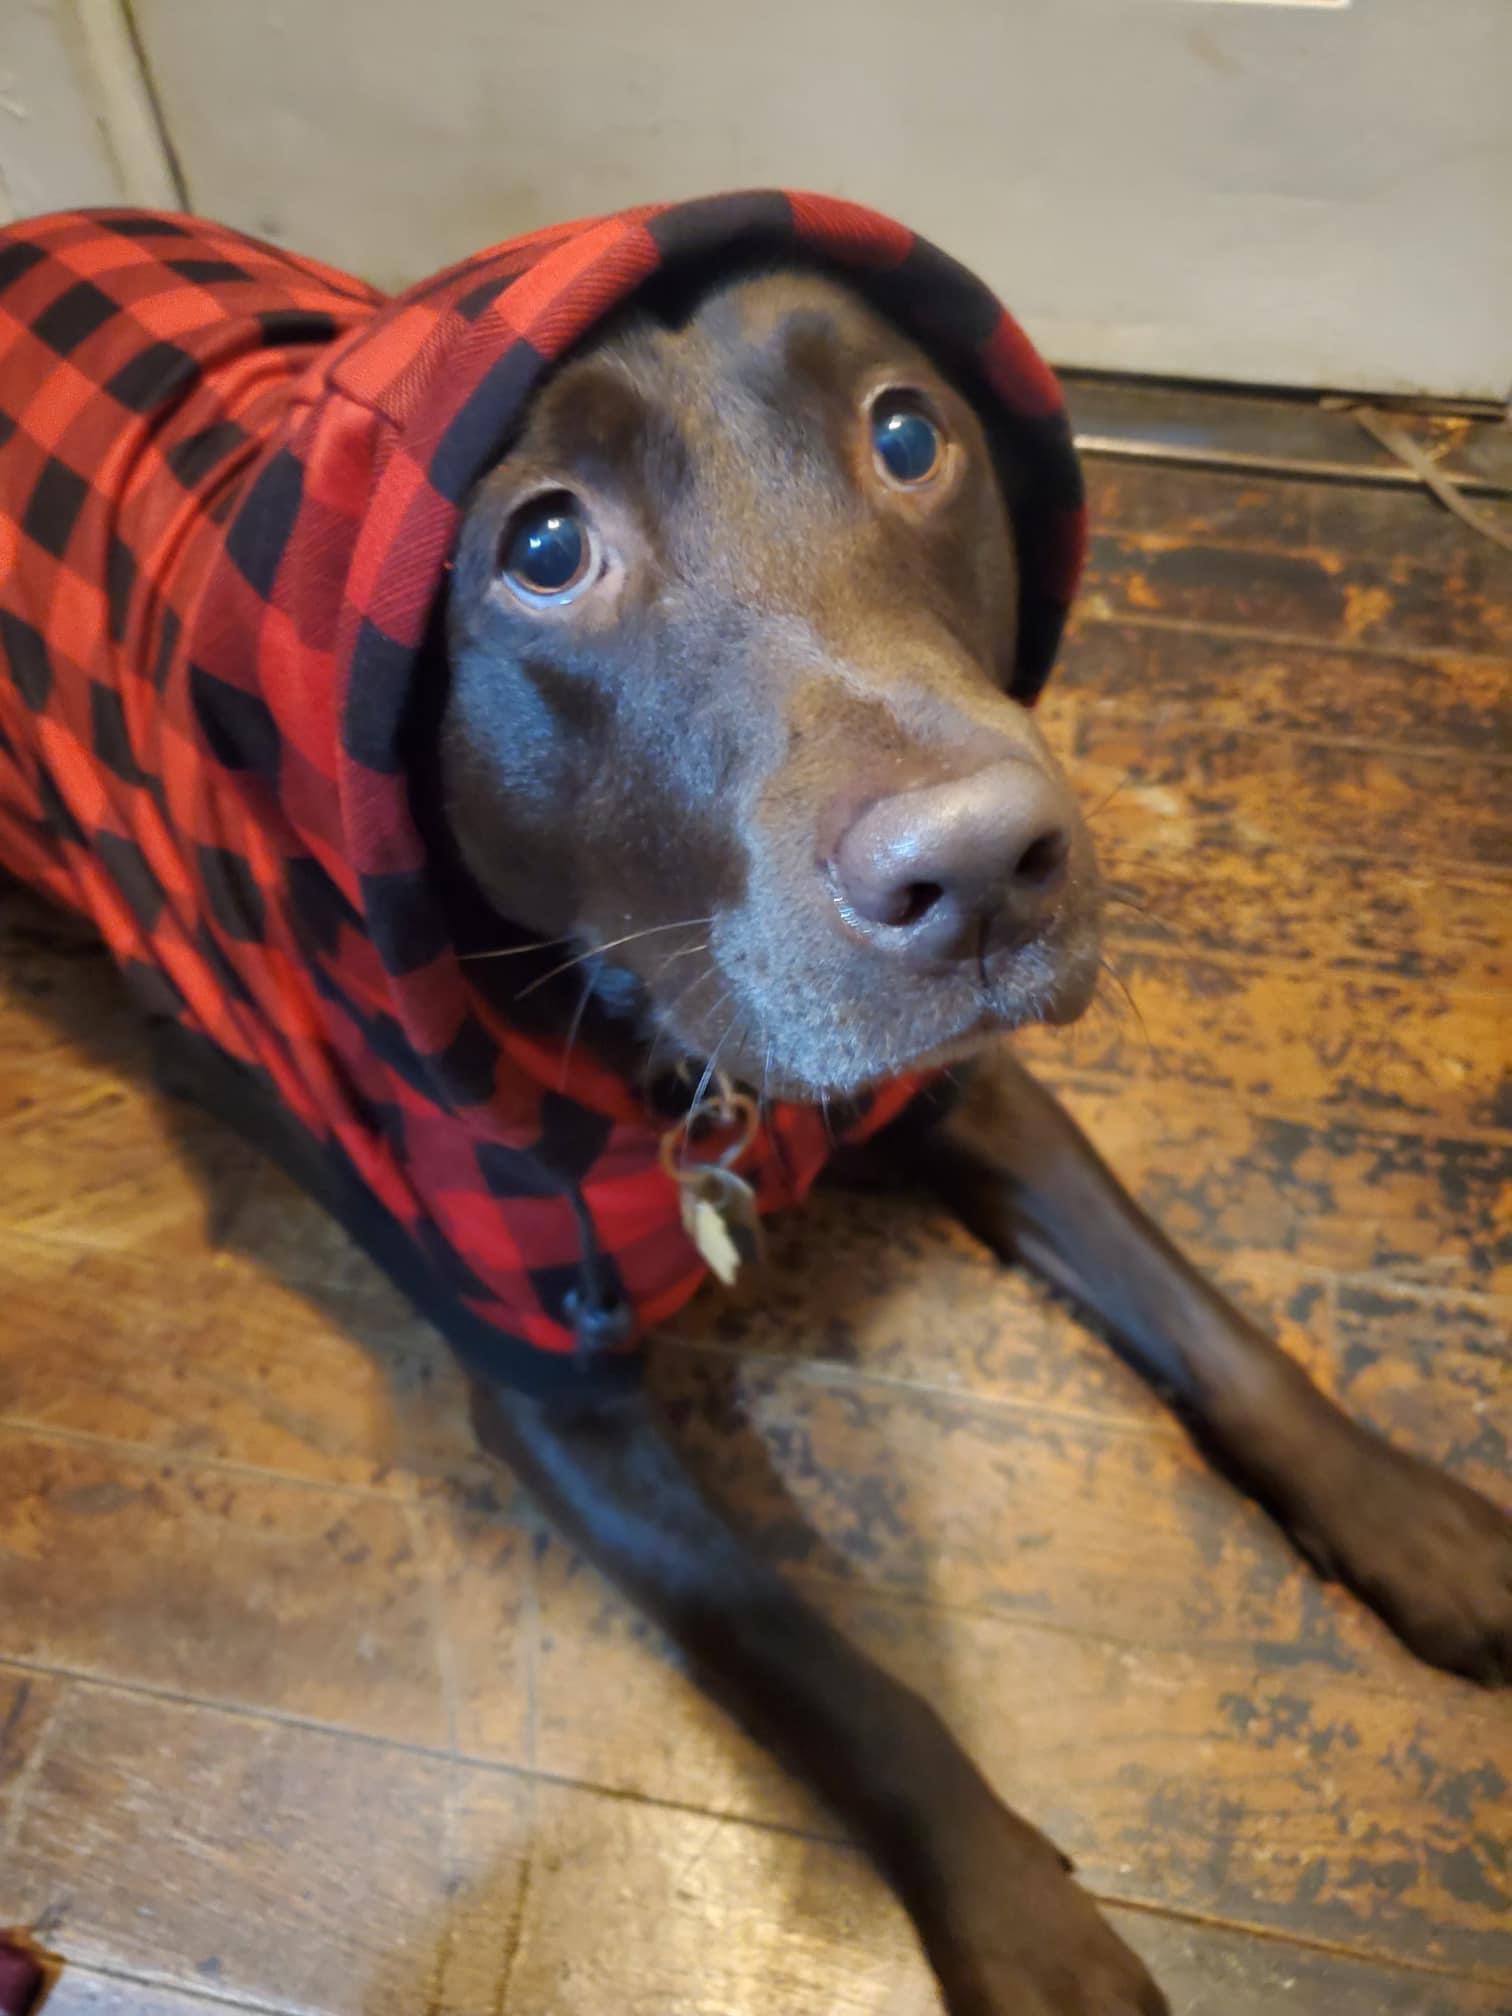 Cold pup needs his jacket for walkies